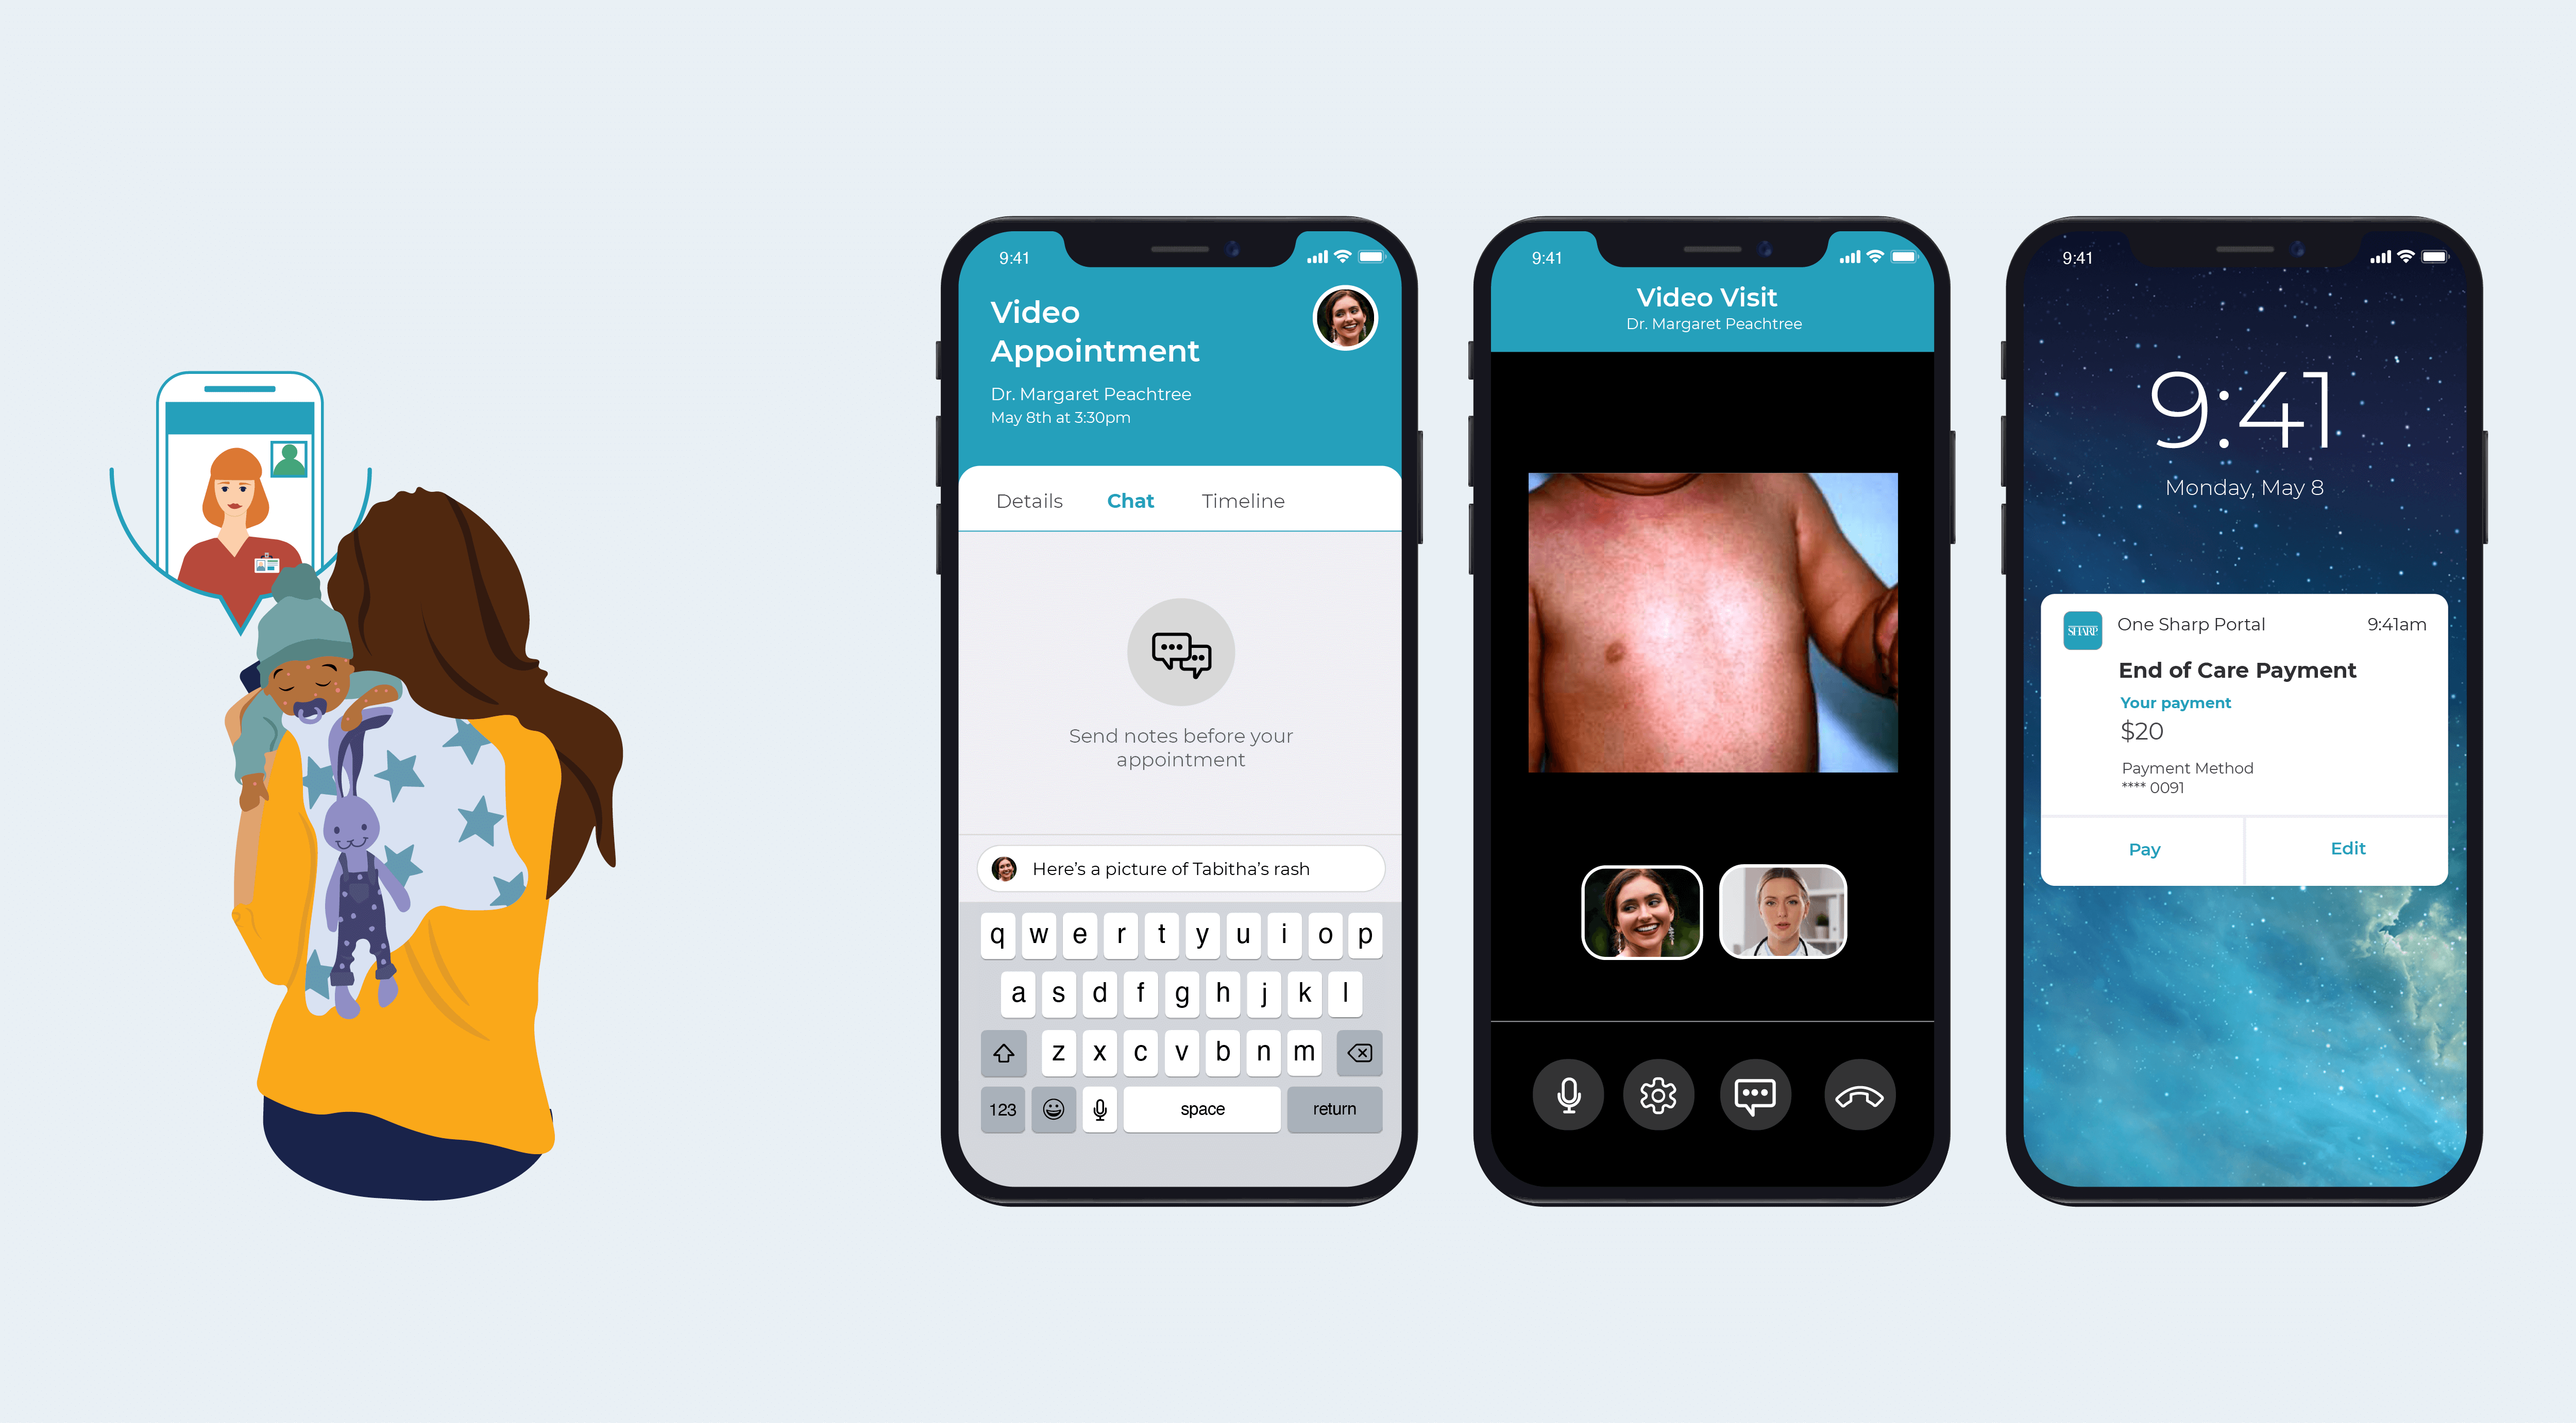 Illustration of a mother holding her baby while talking to a physician on a mobile healthcare app, with three mockups of the app to the right